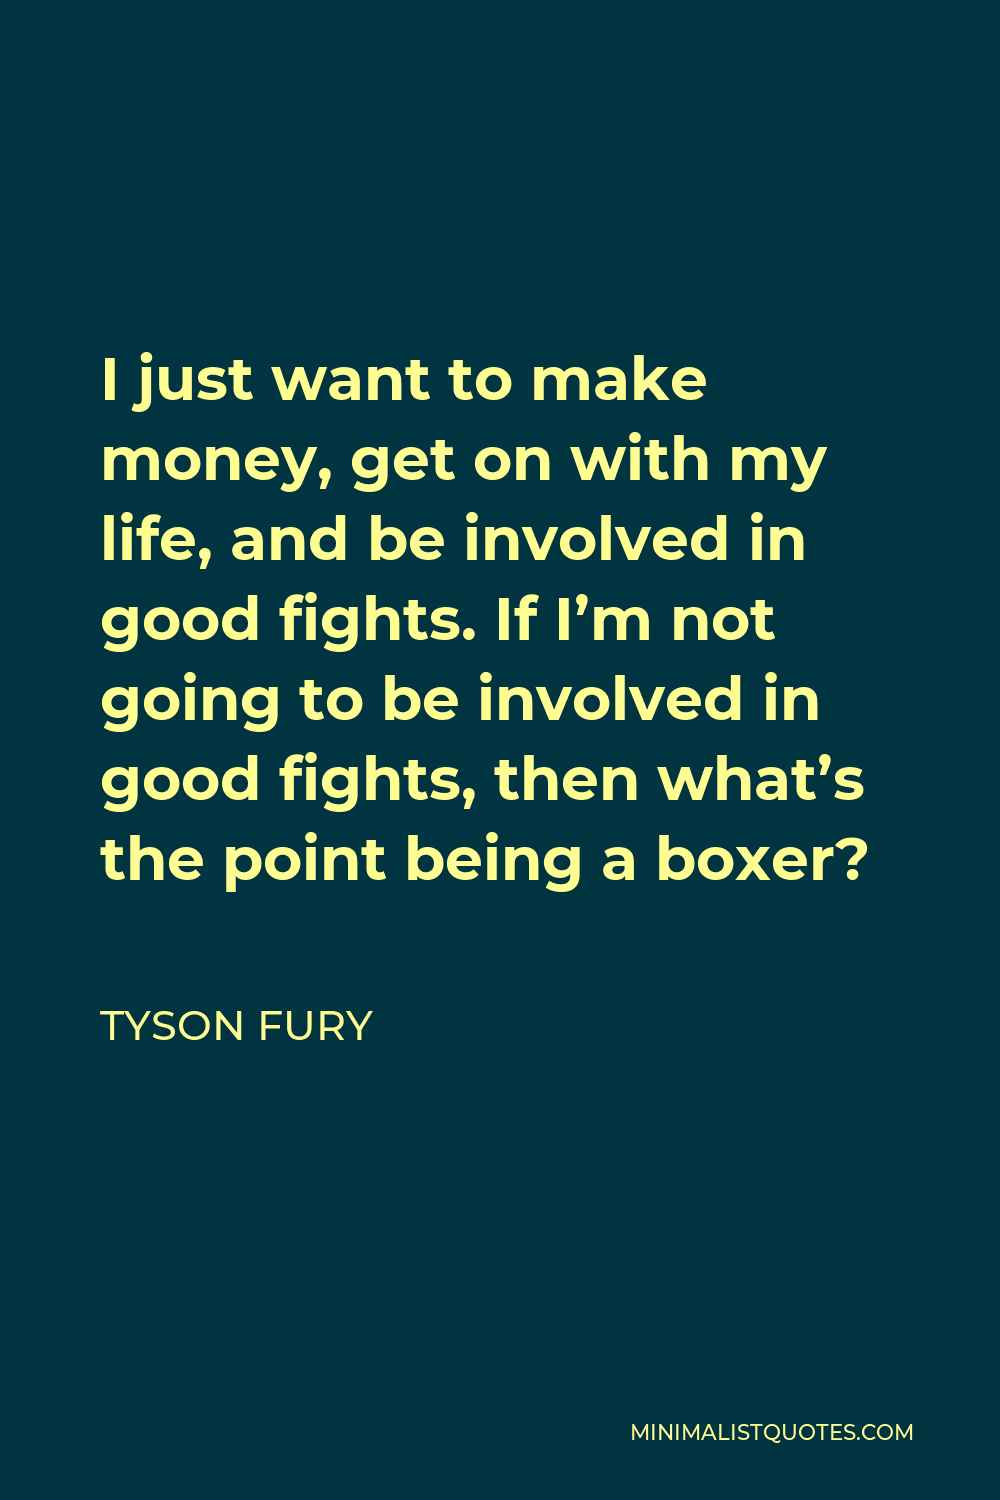 Tyson Fury Quote - I just want to make money, get on with my life, and be involved in good fights. If I’m not going to be involved in good fights, then what’s the point being a boxer?